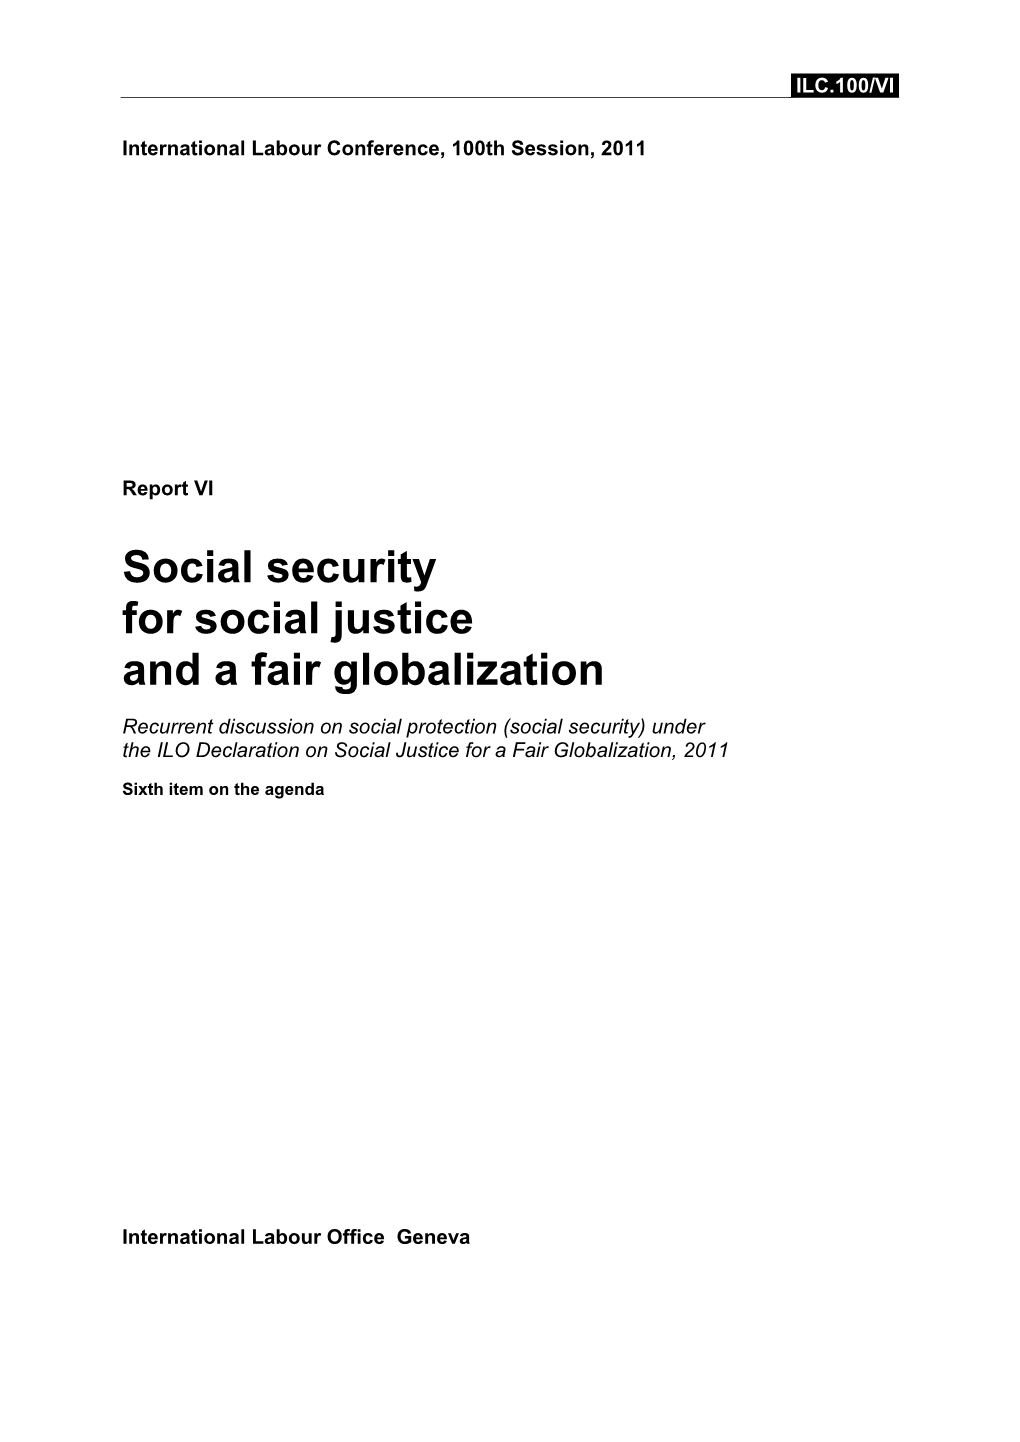 Social Security for Social Justice and a Fair Globalization